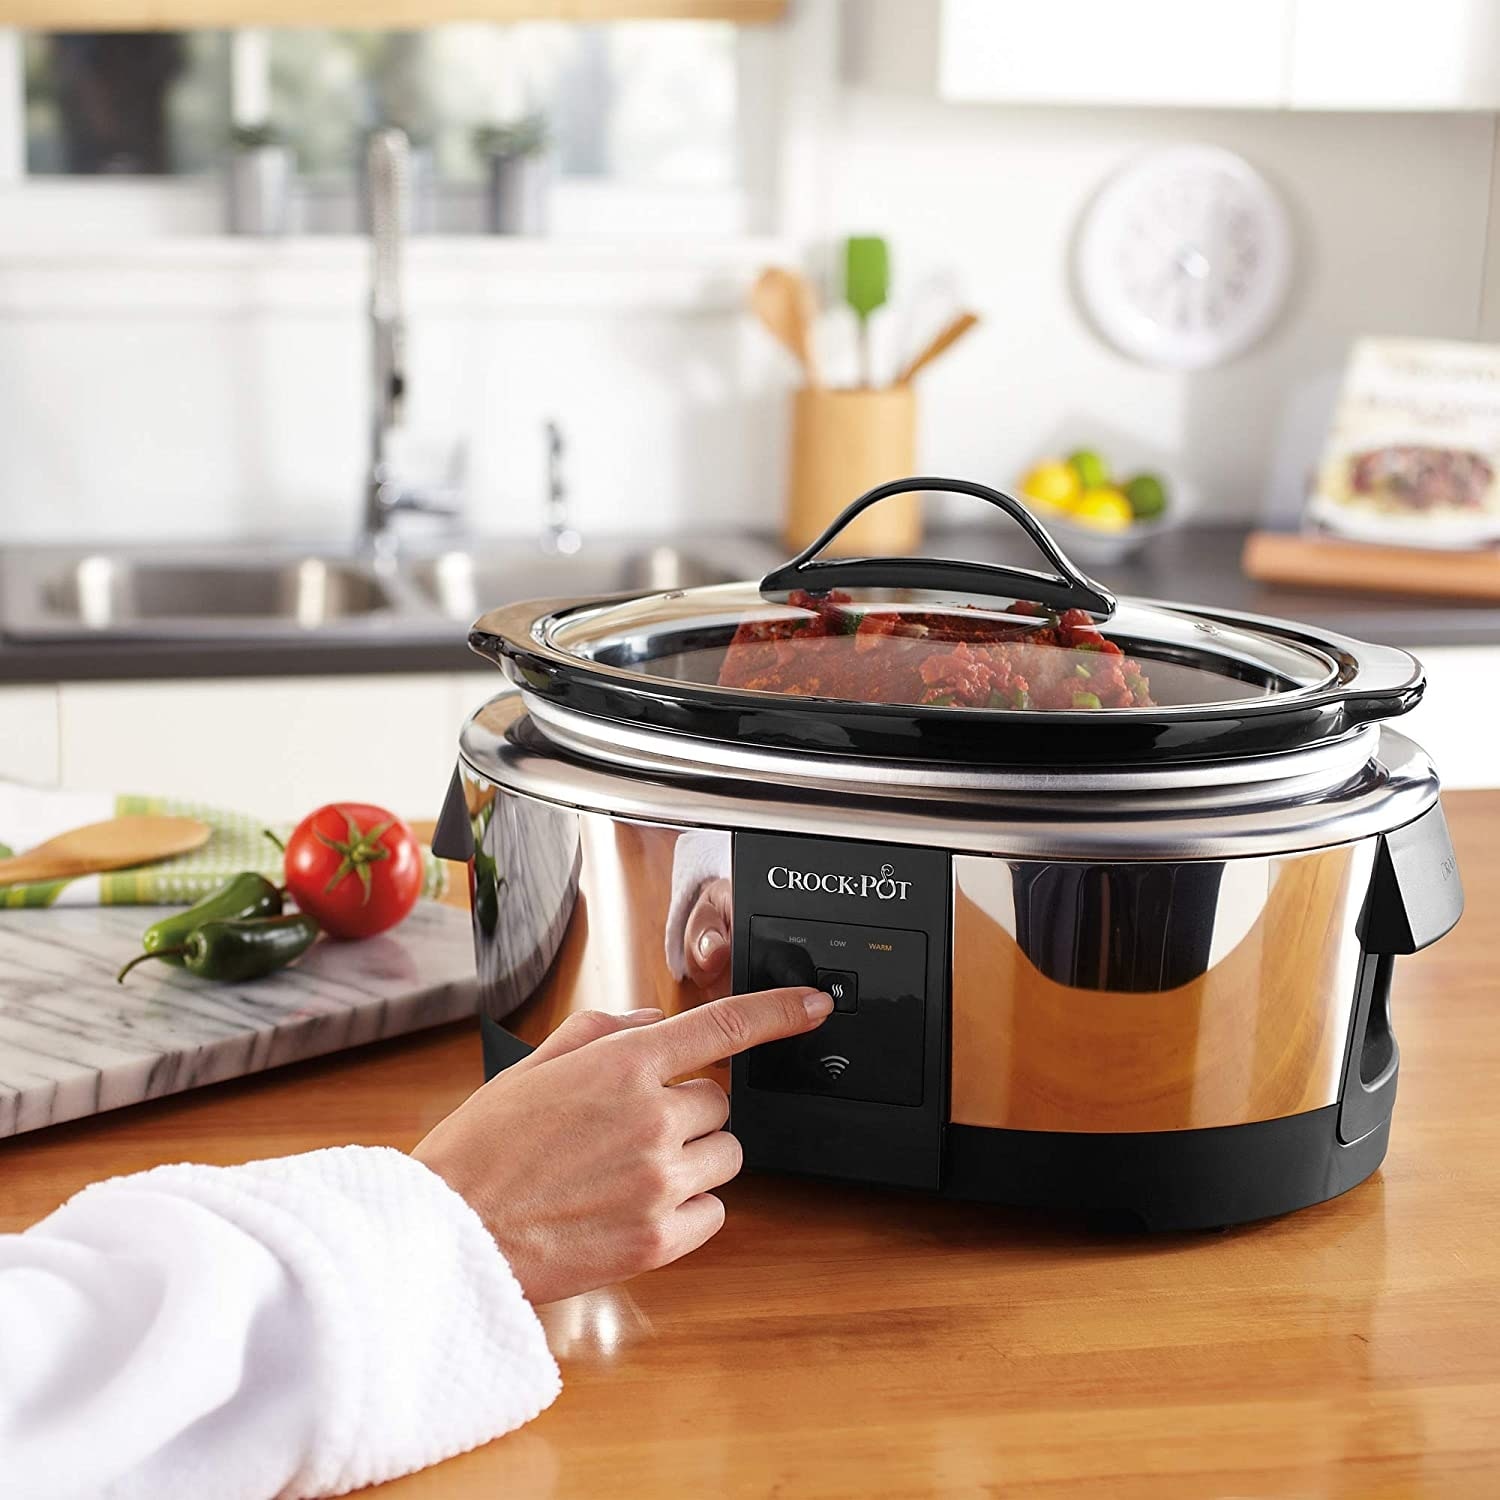 https://ak1.ostkcdn.com/images/products/is/images/direct/8512c22054fad7d6851080abe6bb5a12686329e7/Crock-Pot-Slow-Cooker-Works-with-6-Quart-Programmable-Stainless-Steel.jpg